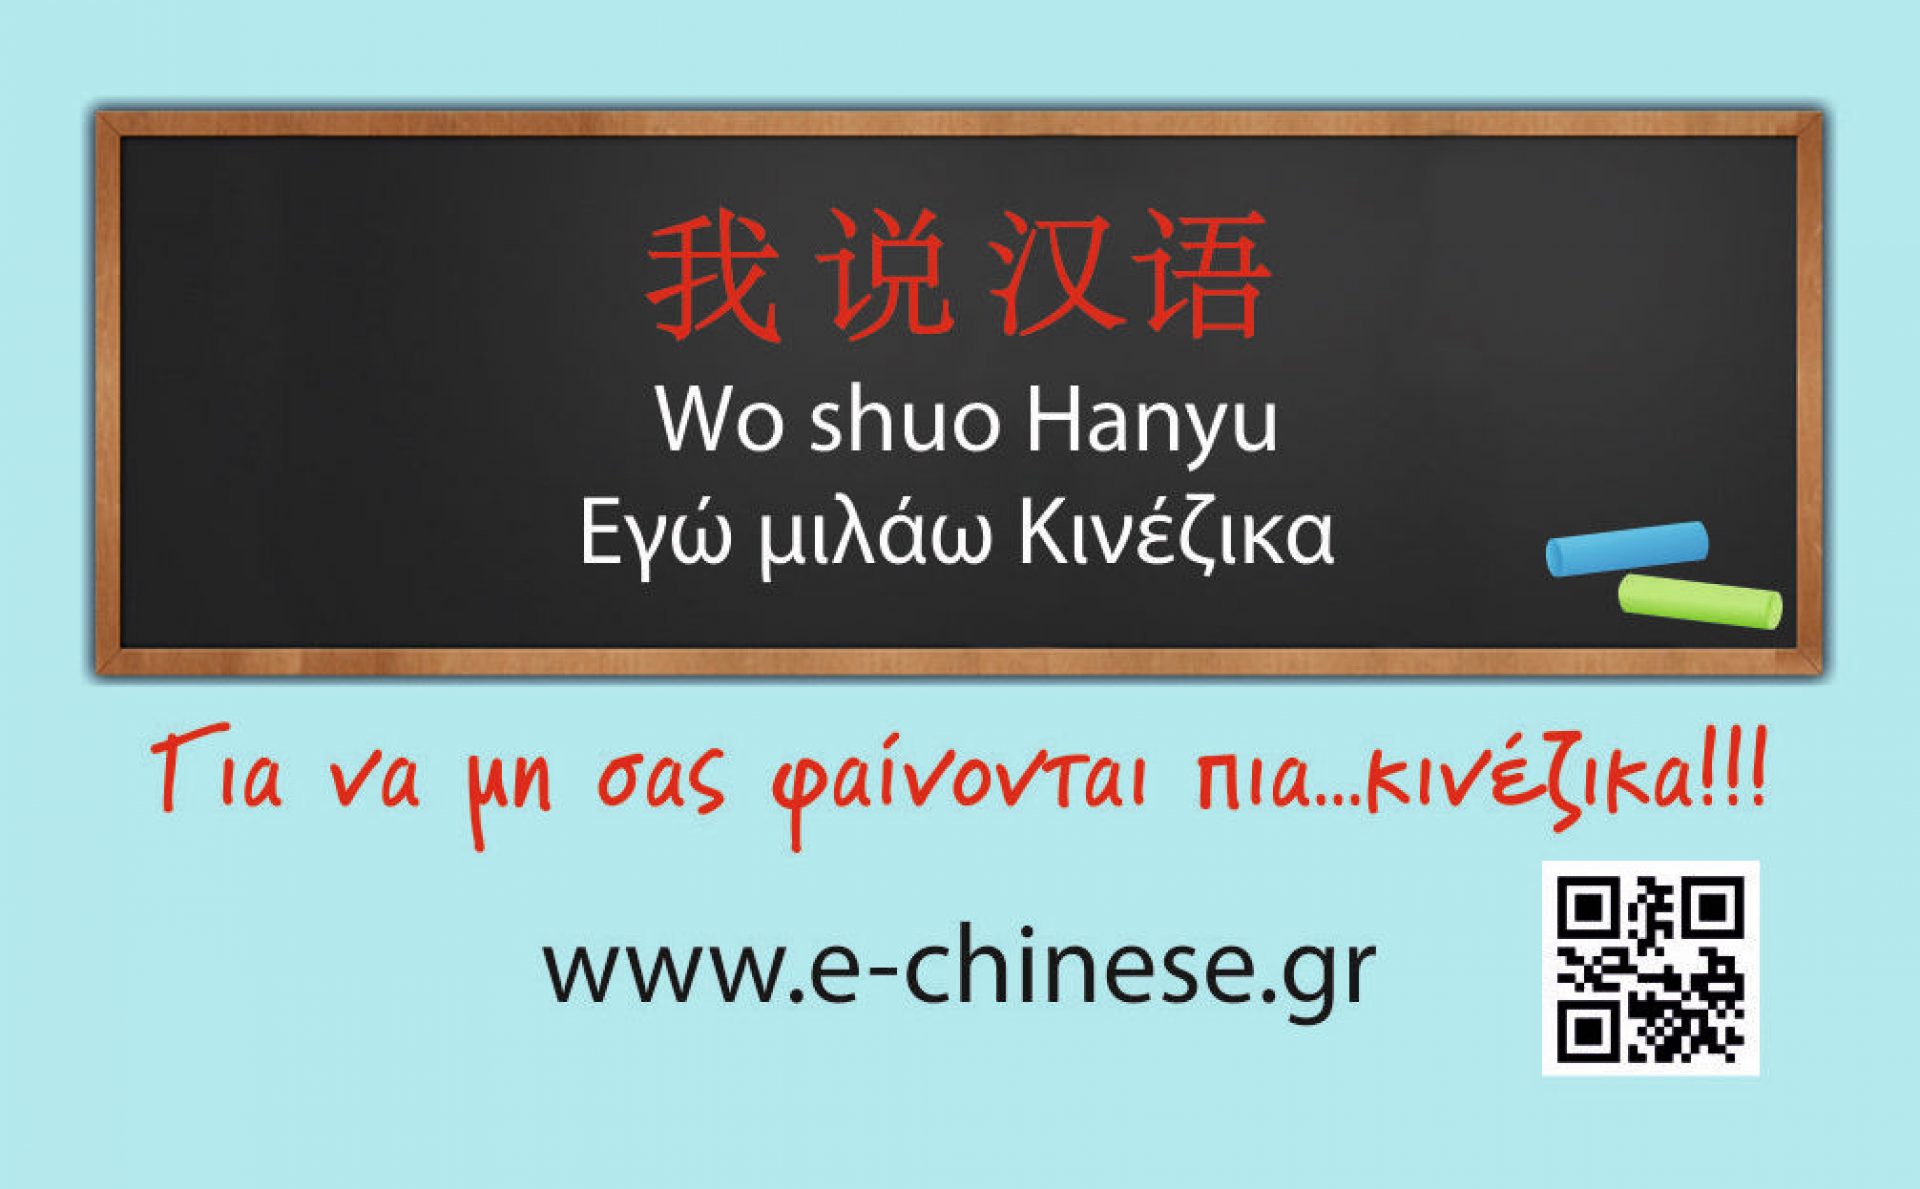 www.e-chinese.gr